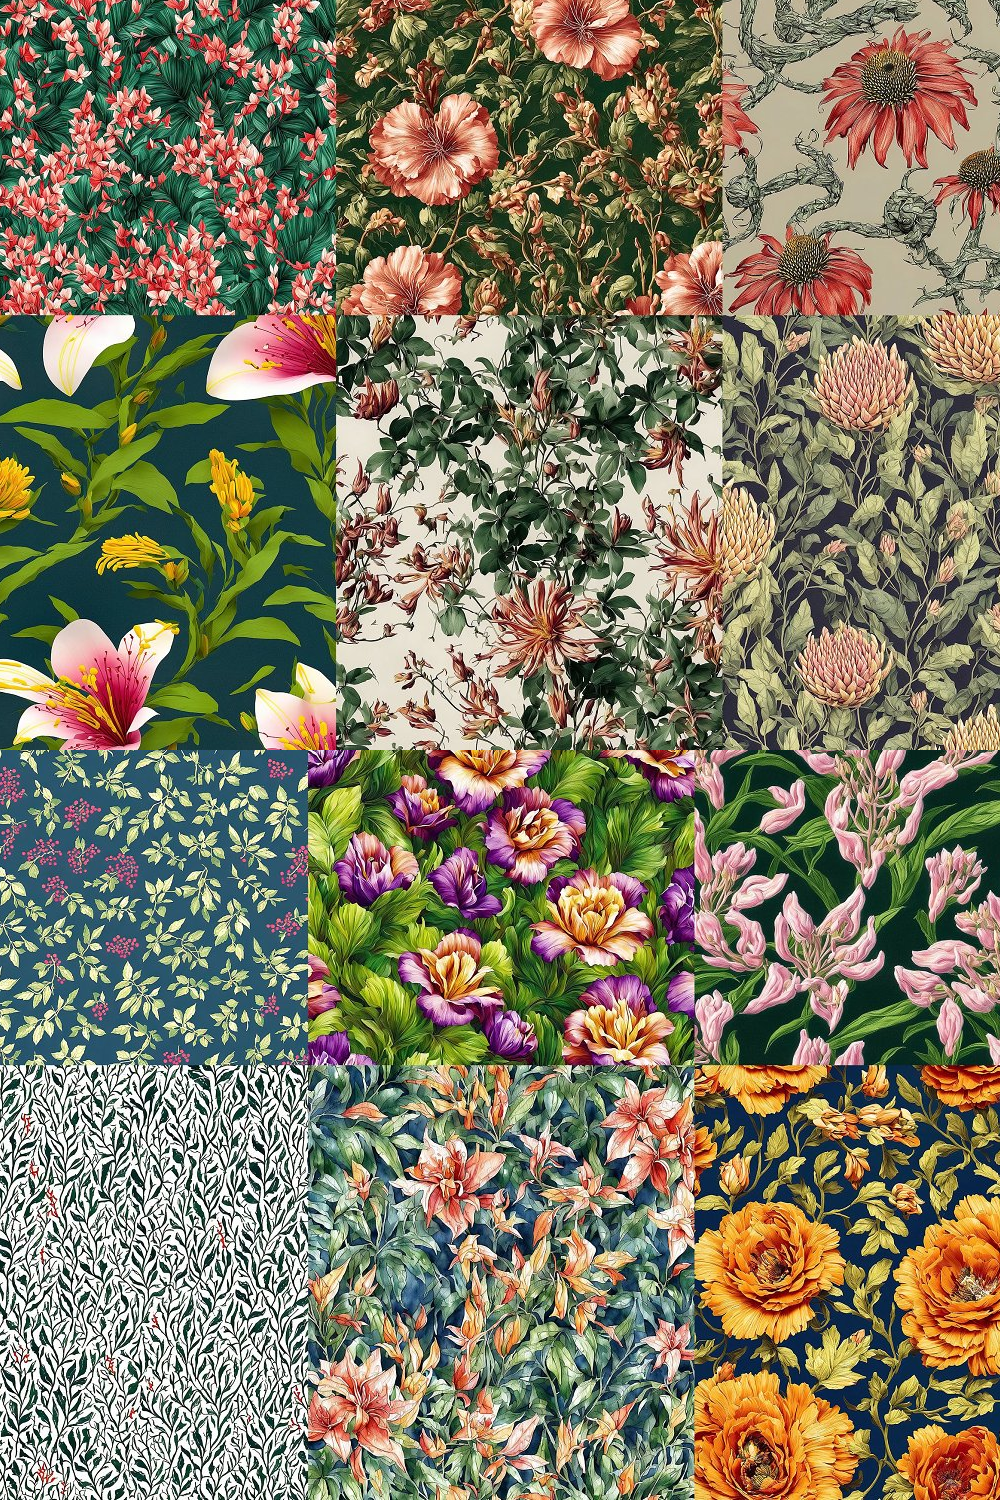 Illustrations 202 seamless floral backgrounds of pinterest.